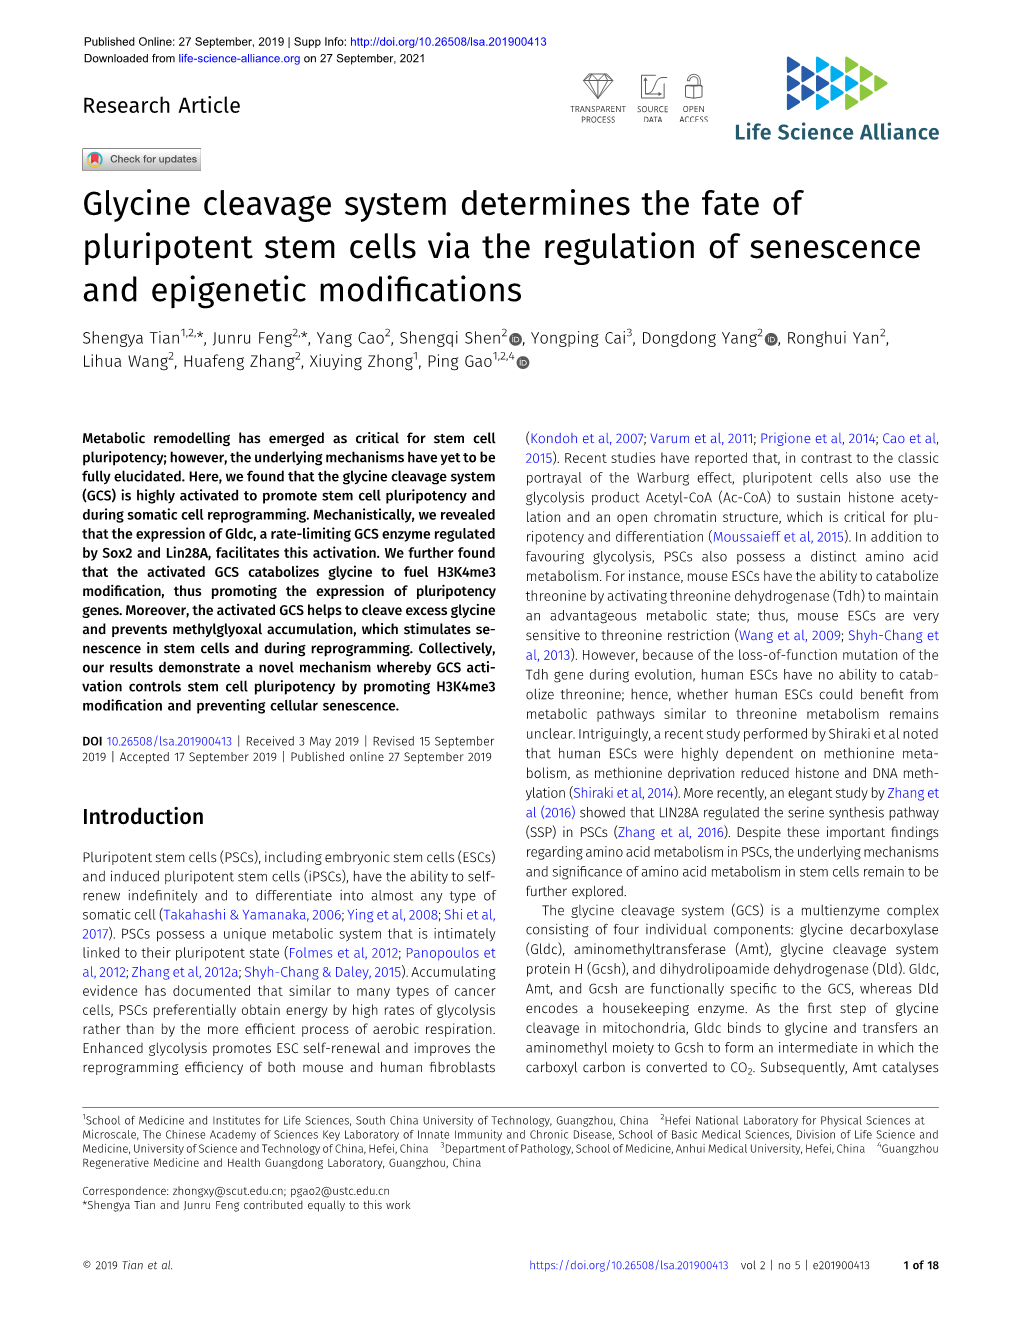 Glycine Cleavage System Determines the Fate of Pluripotent Stem Cells Via the Regulation of Senescence and Epigenetic Modificati